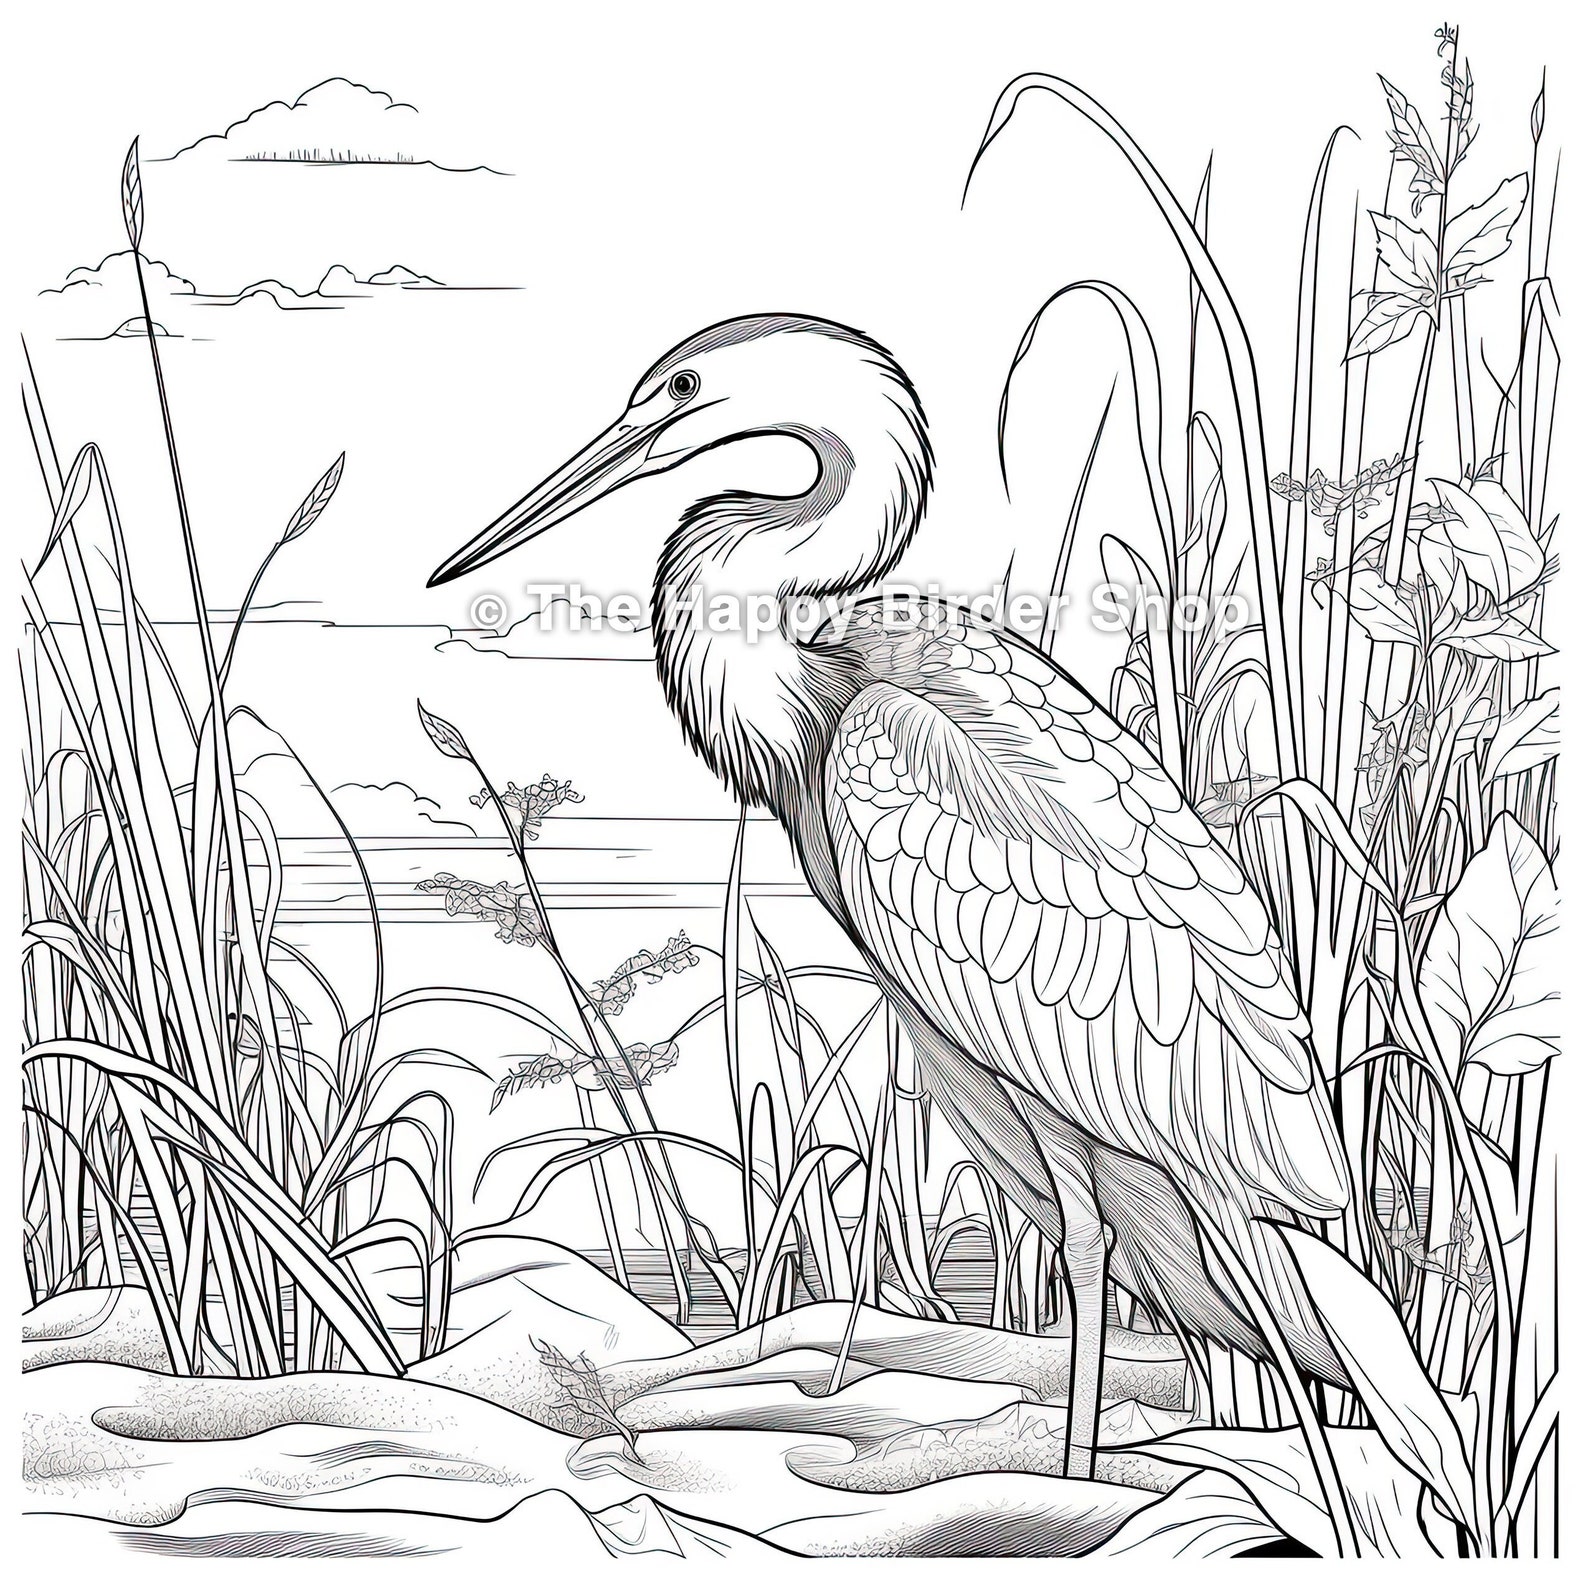 Blue Heron Coloring Page Bird Printable Nature Art Therapy Stress ...